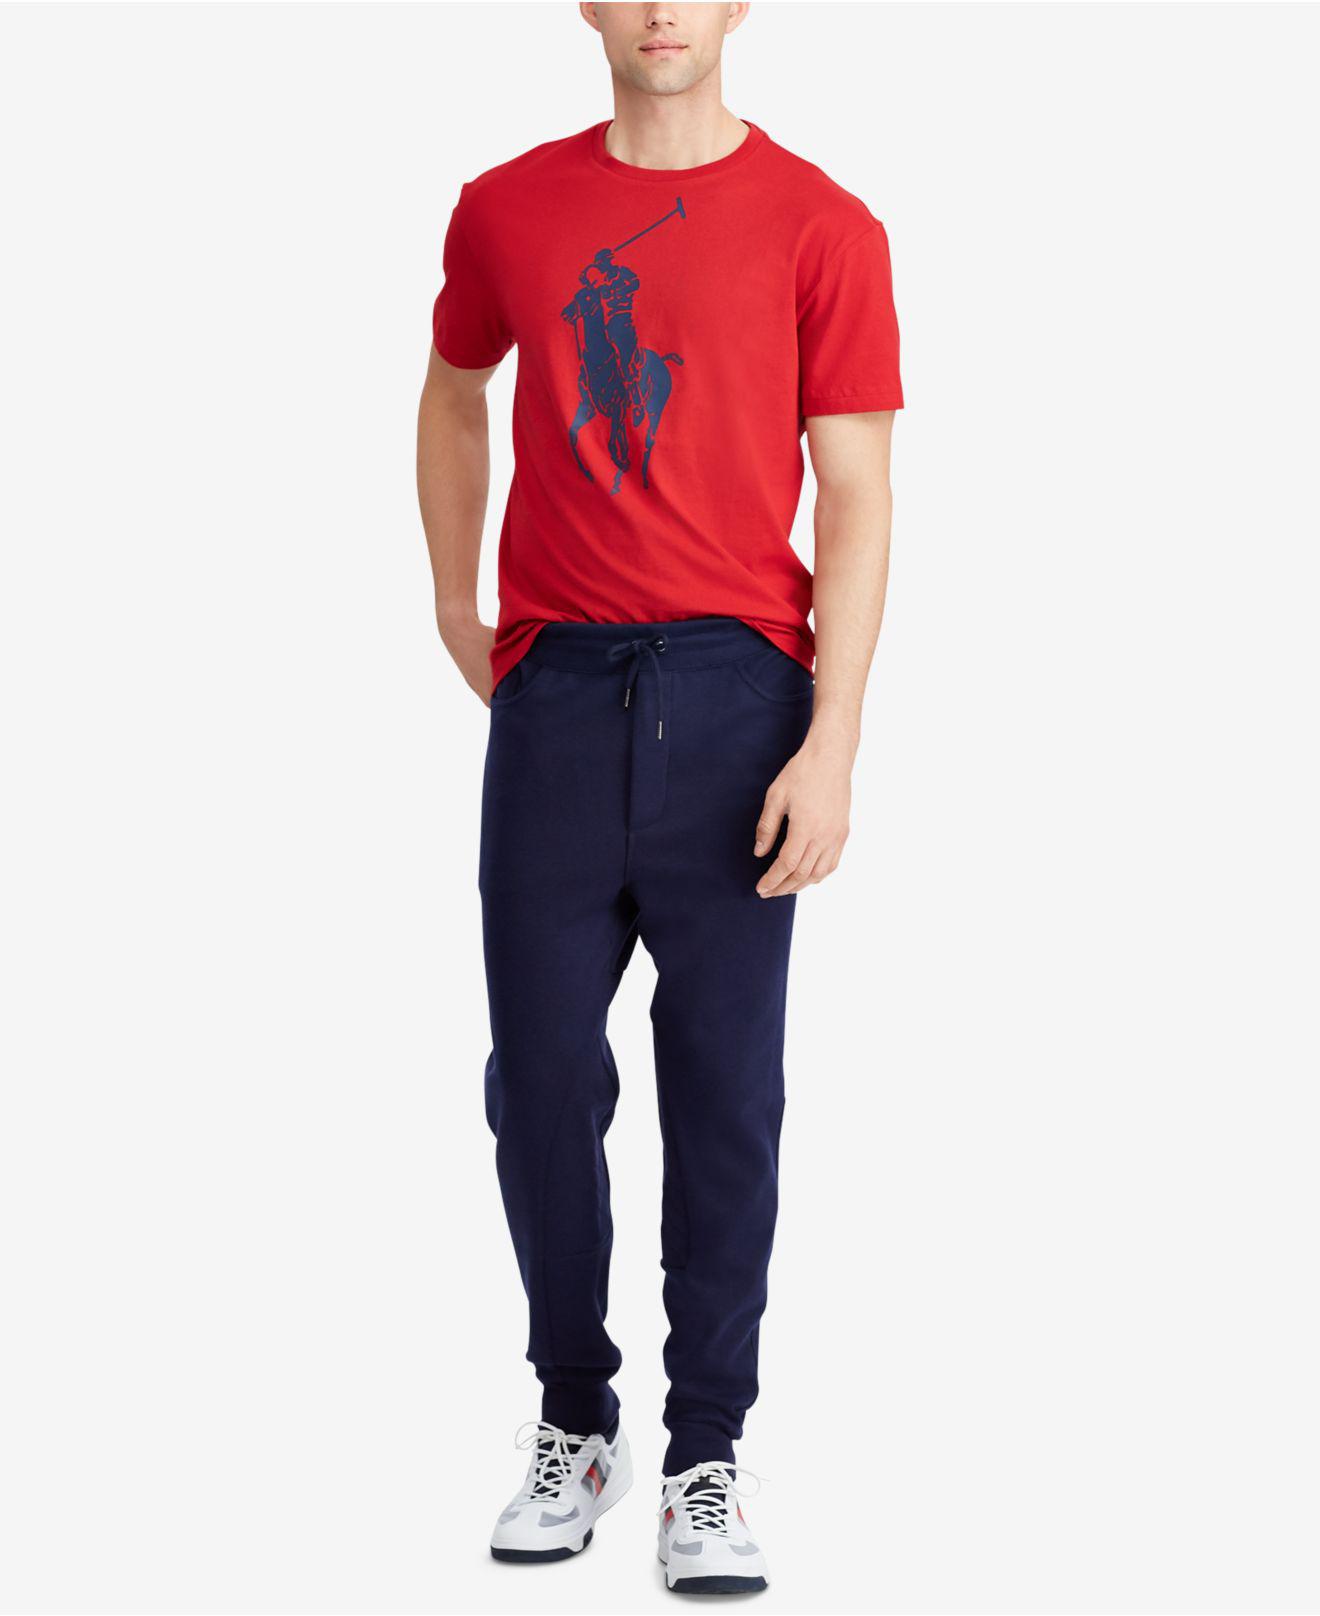 Polo Ralph Lauren Cotton Classic-fit Big Pony T-shirt in Bright Red (Red)  for Men - Lyst